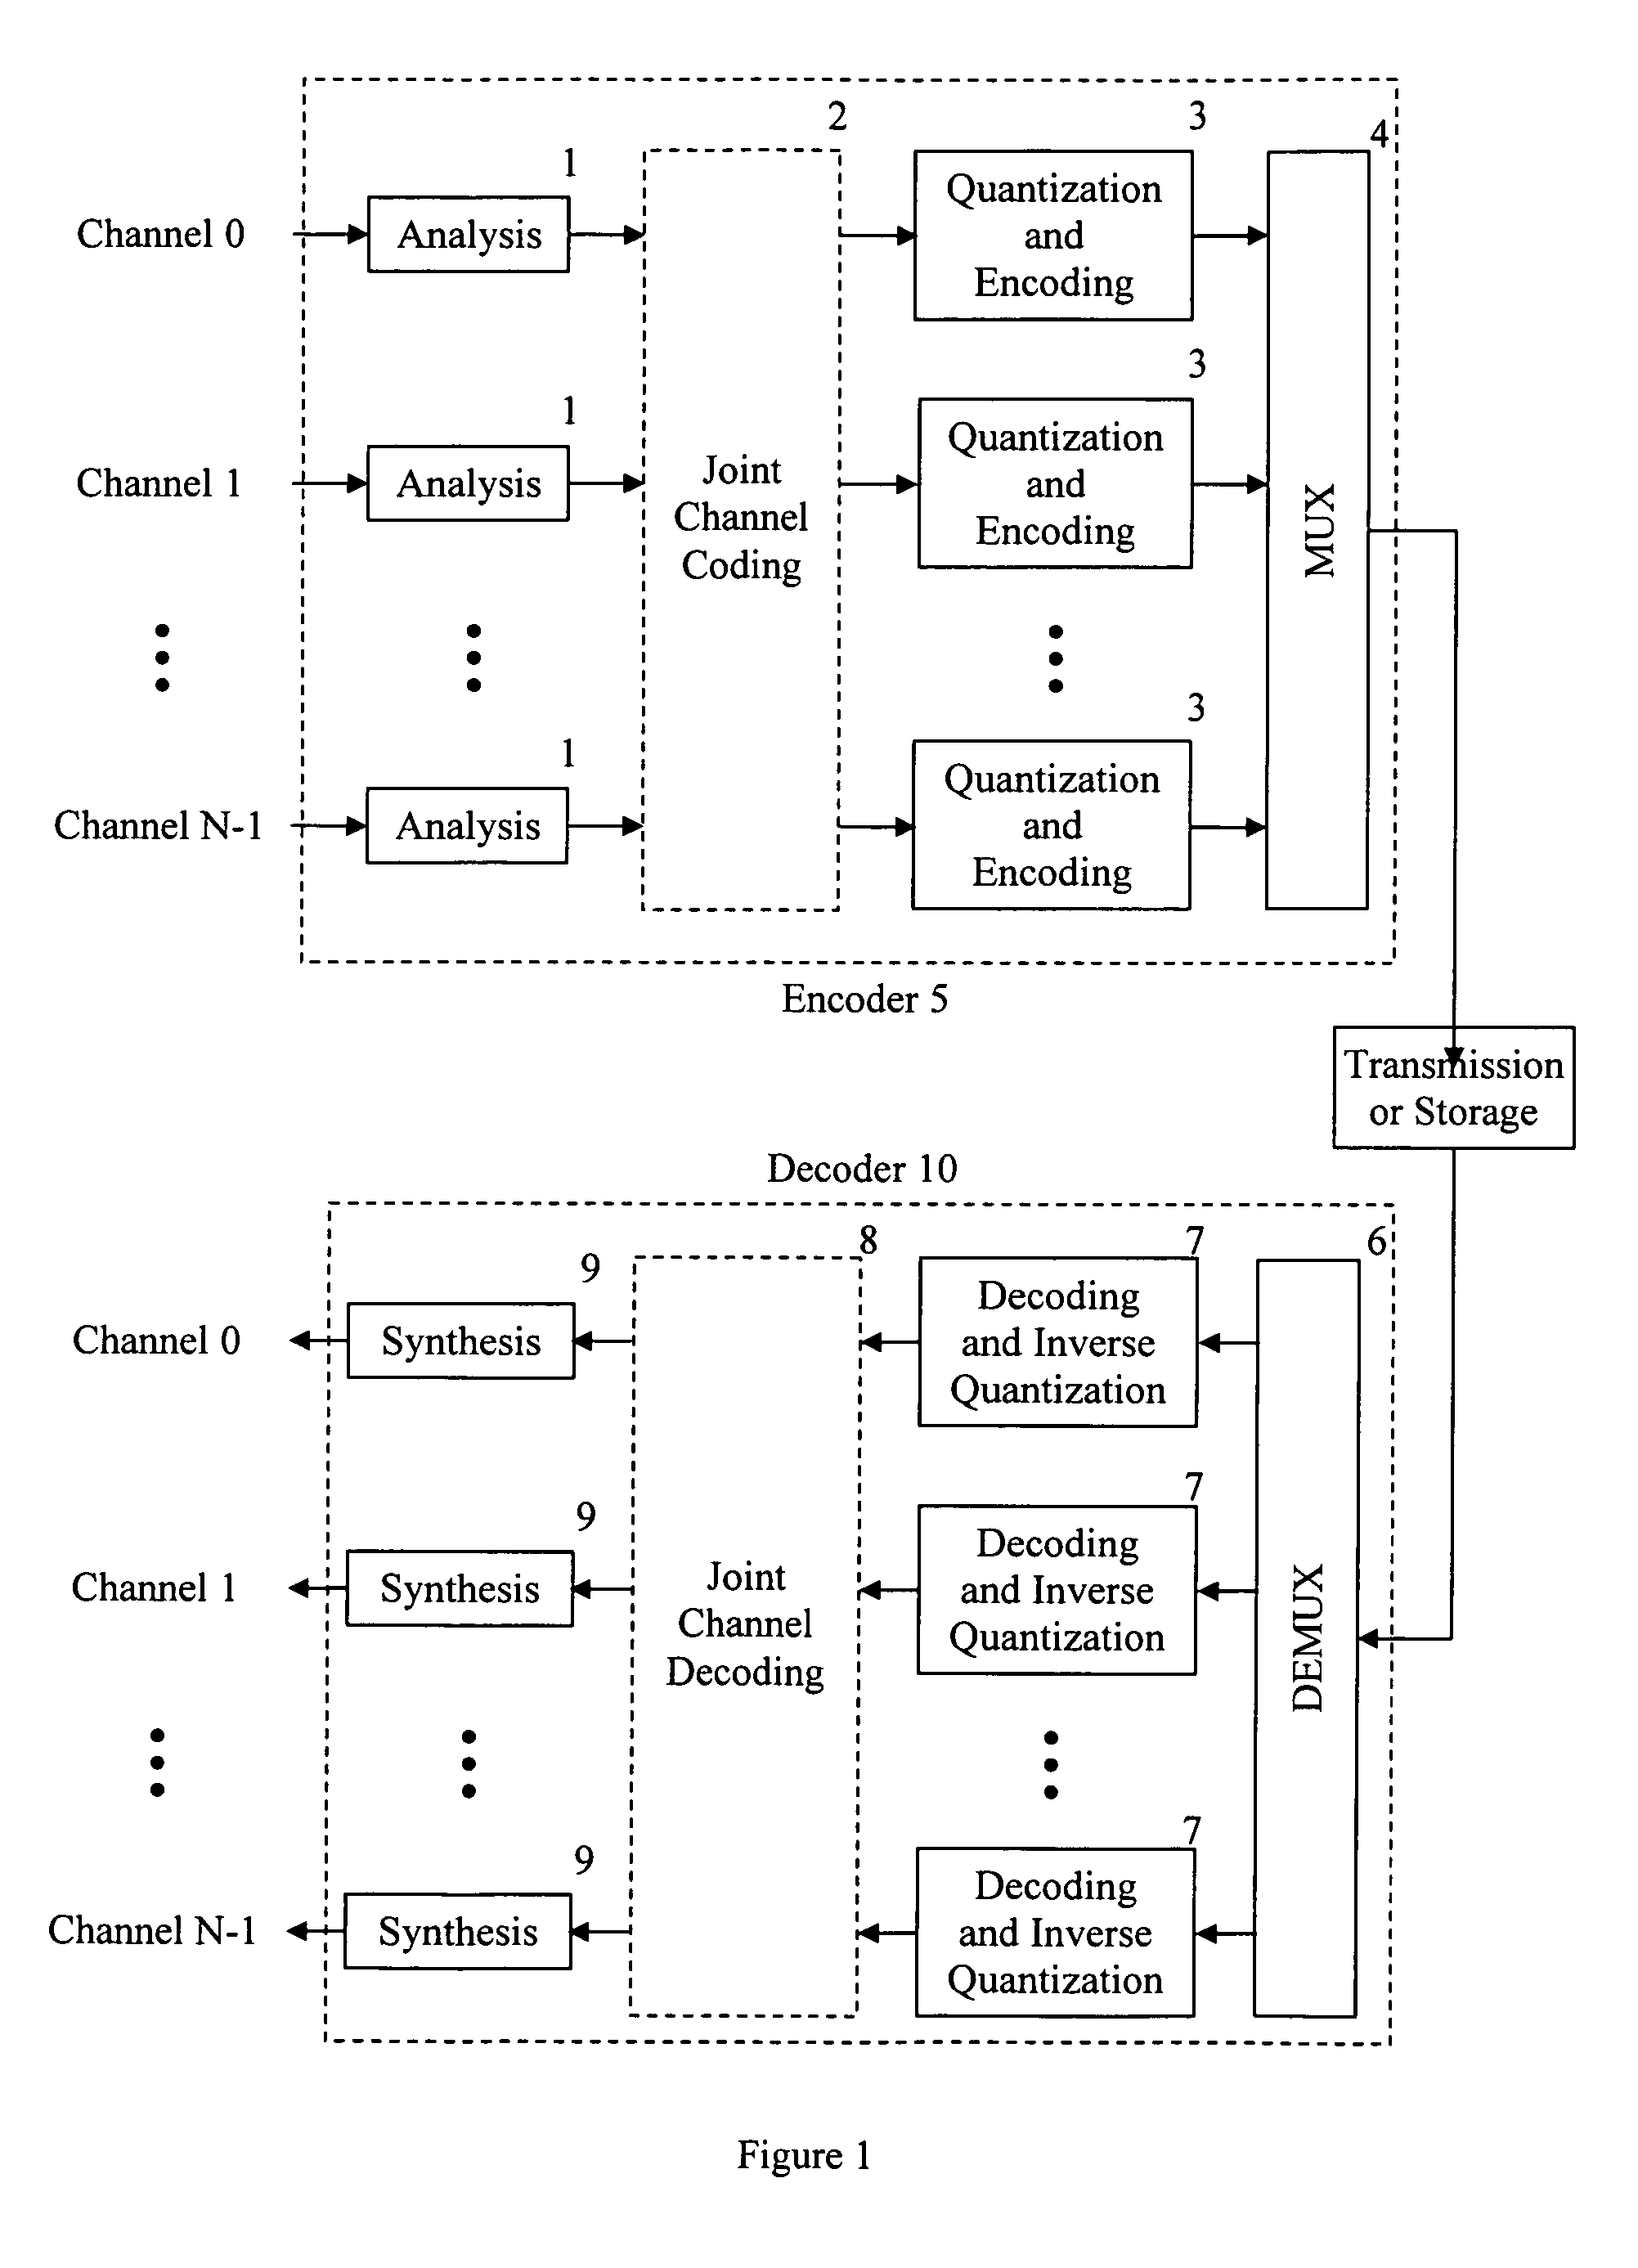 Apparatus and methods for multichannel digital audio coding